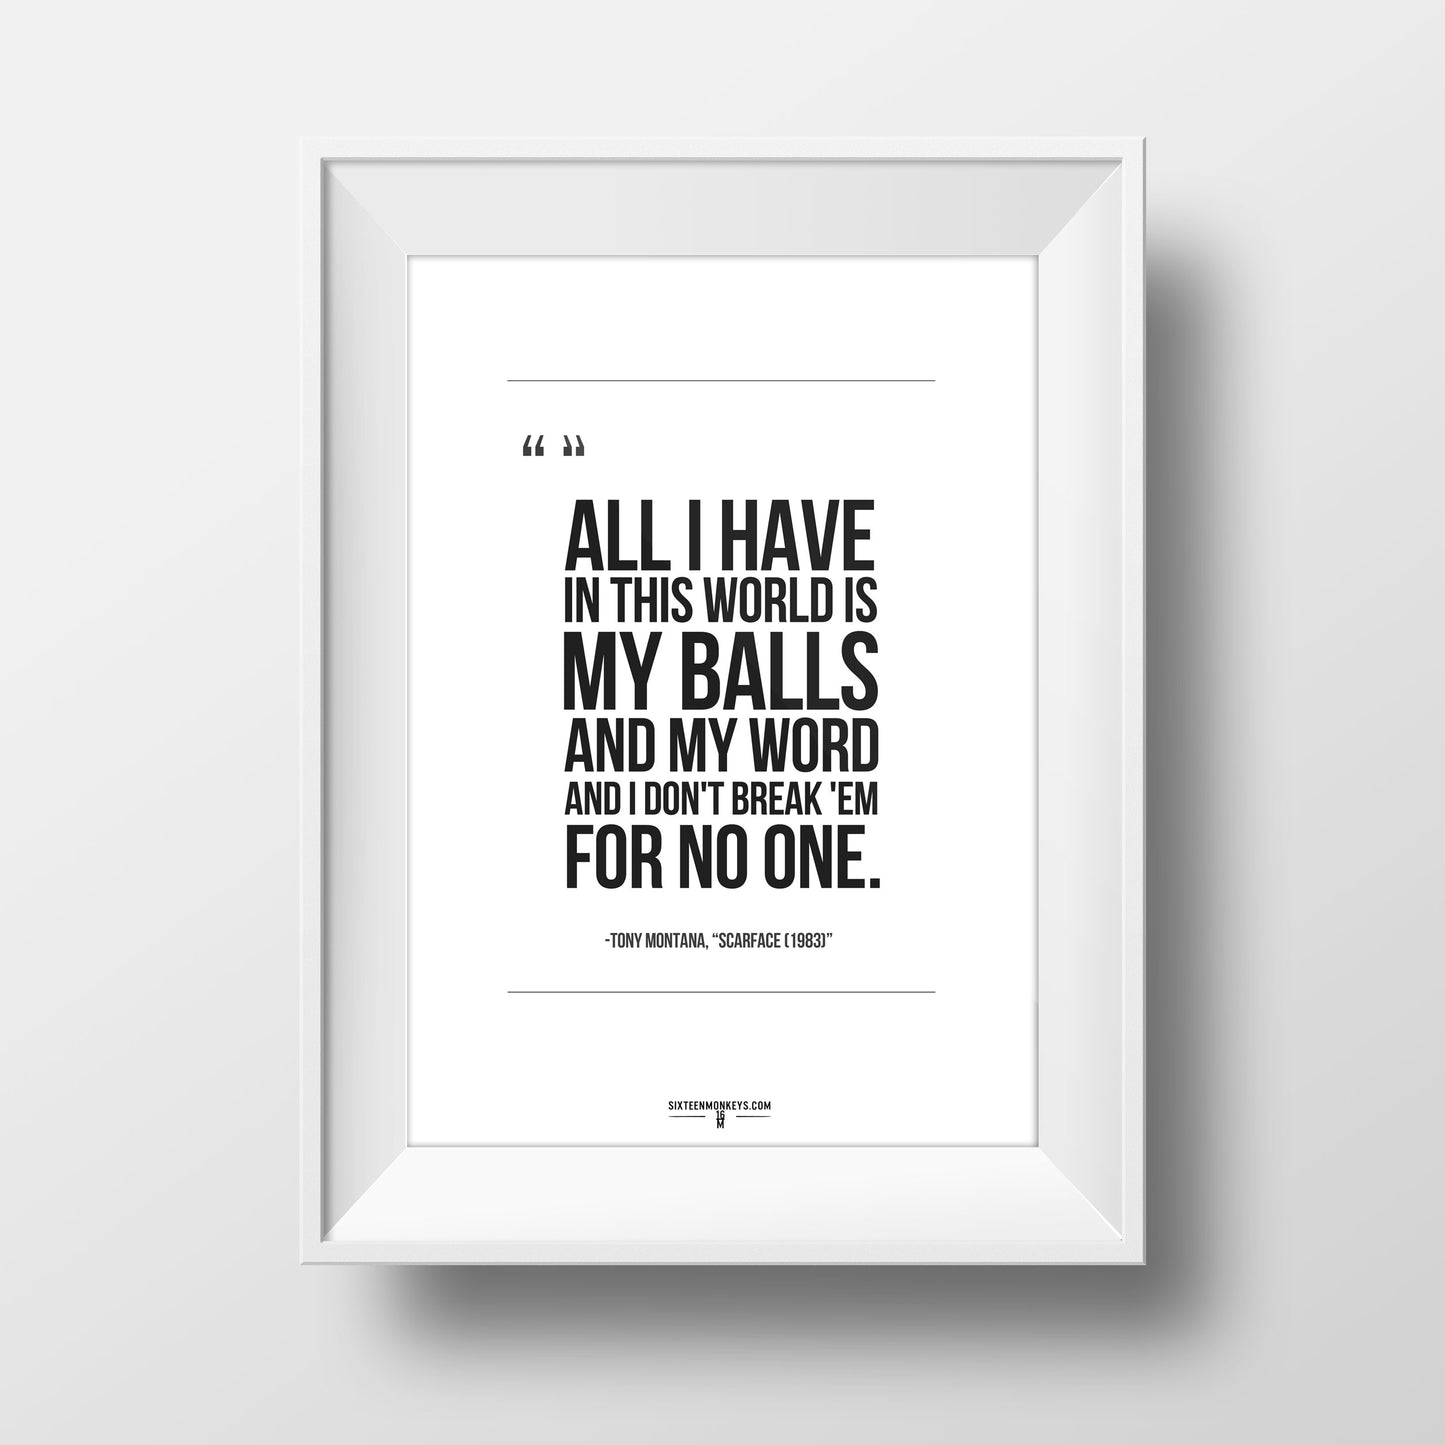 ‘‘Scarface’ My Balls and My Word’ Art Print